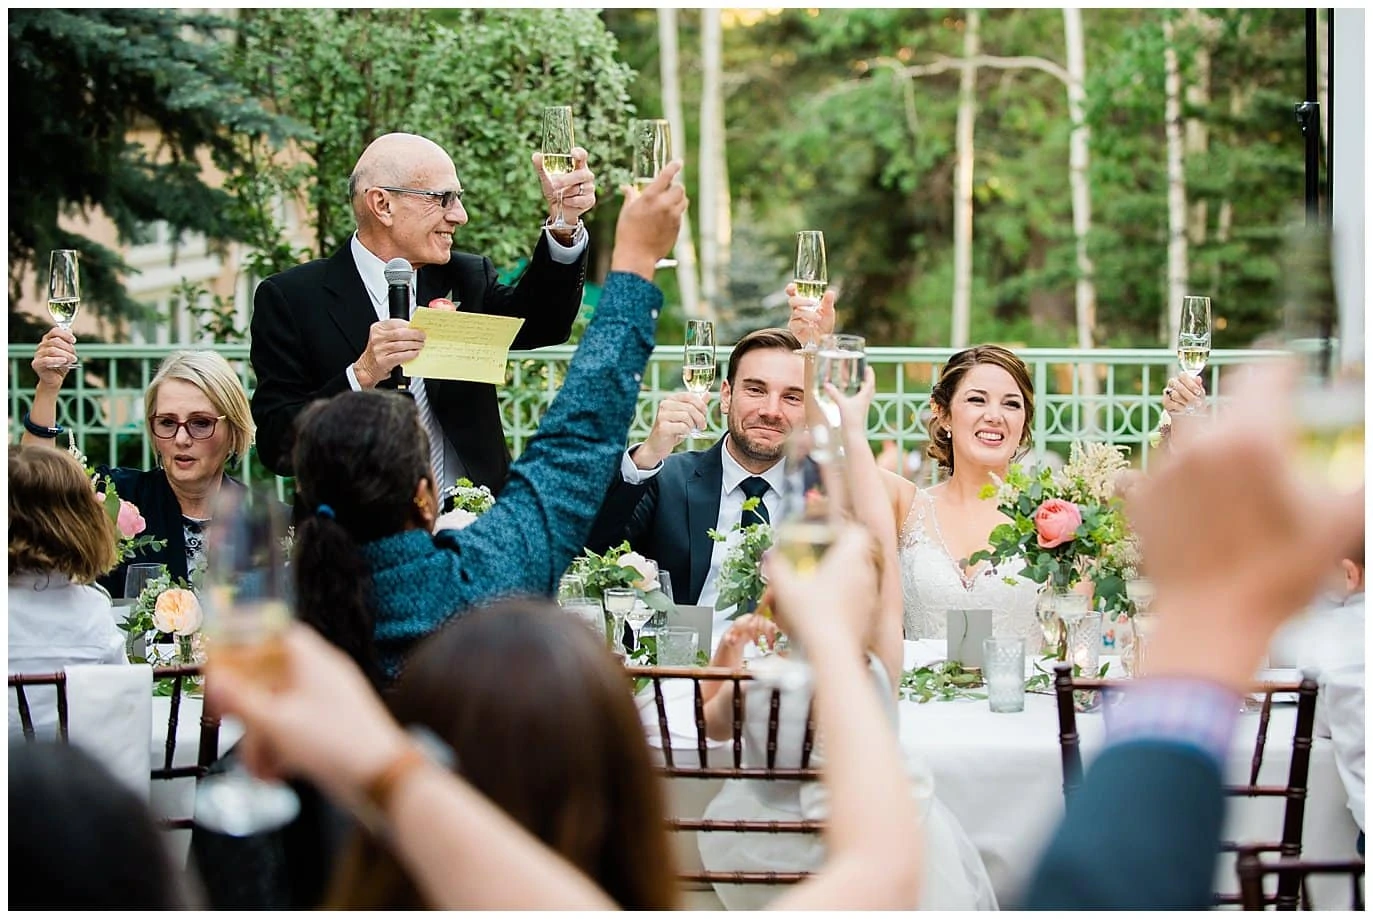 Beautiful toasts at Sonnenalp Hotel Vail Colorado Wedding by Vail Wedding Photographer Jennie Crate